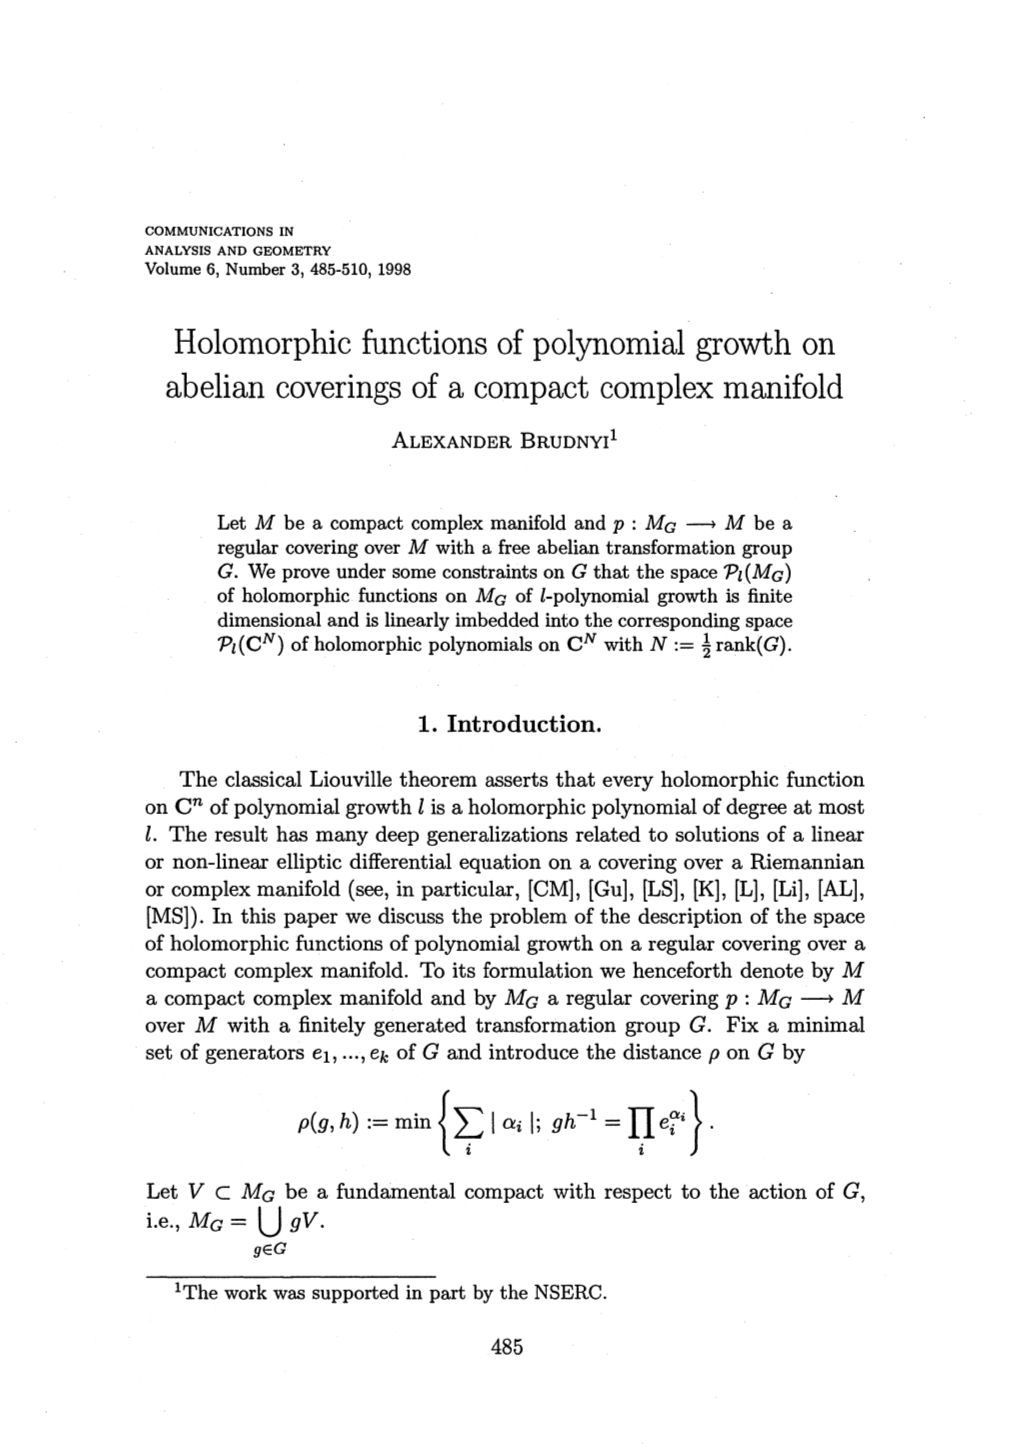 Holomorphic Functions of Polynomial Growth on Abelian Coverings of a Compact Complex Manifold